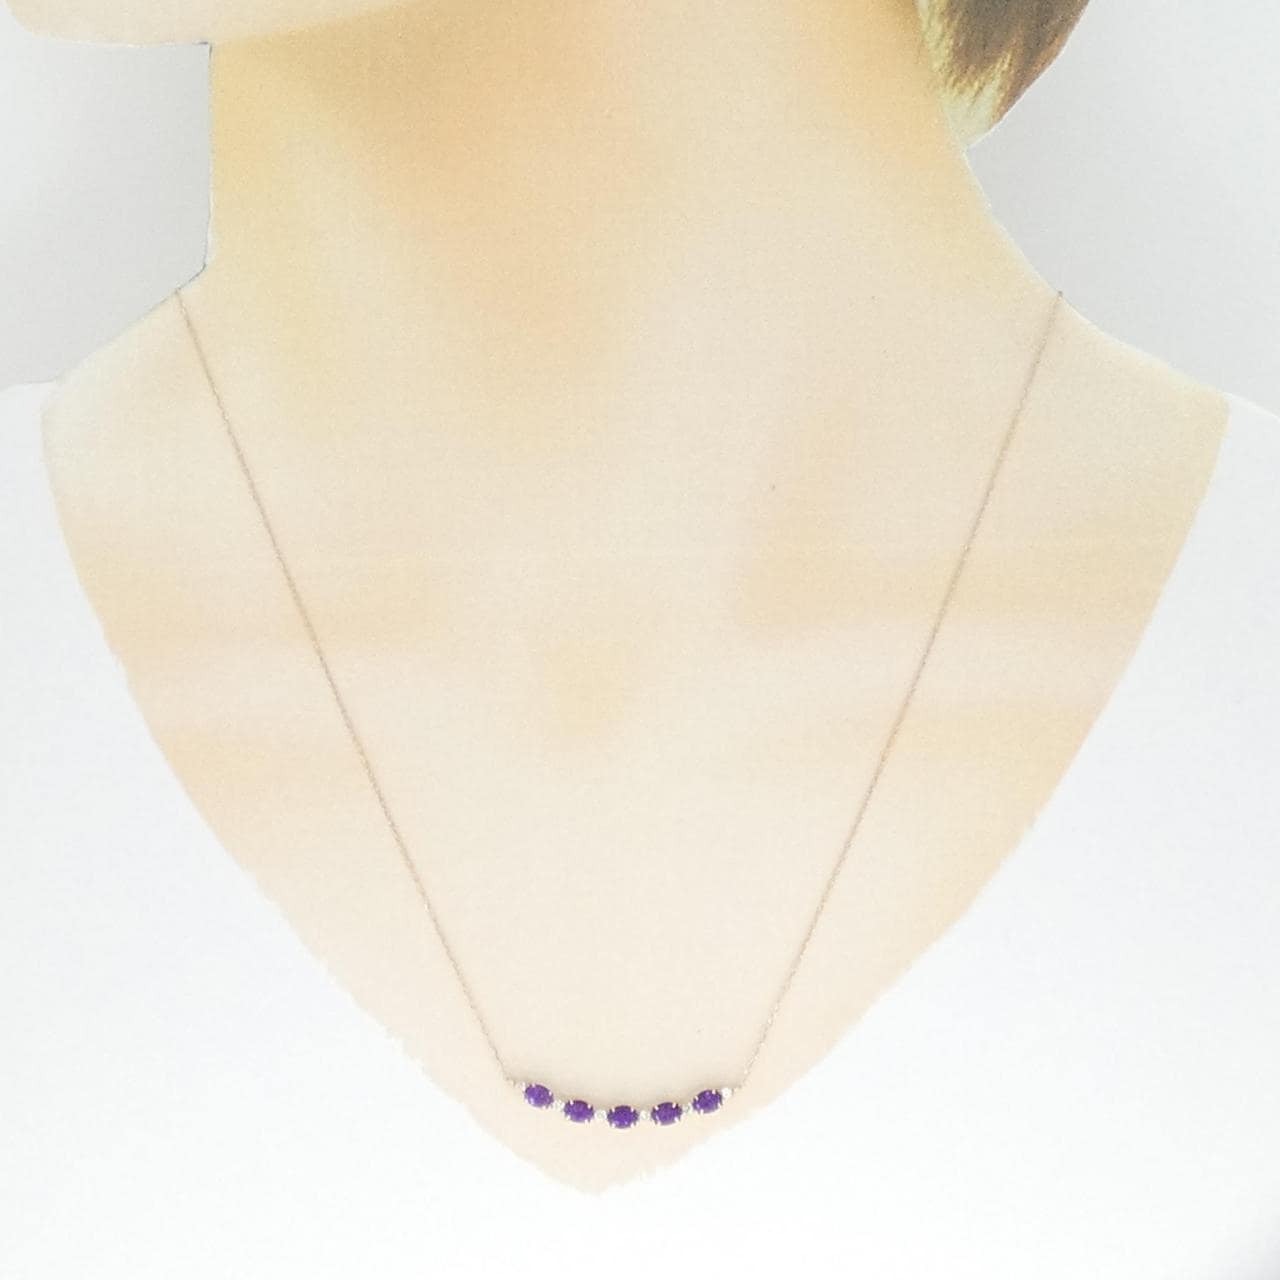 [BRAND NEW] K18PG Amethyst Necklace 0.78CT